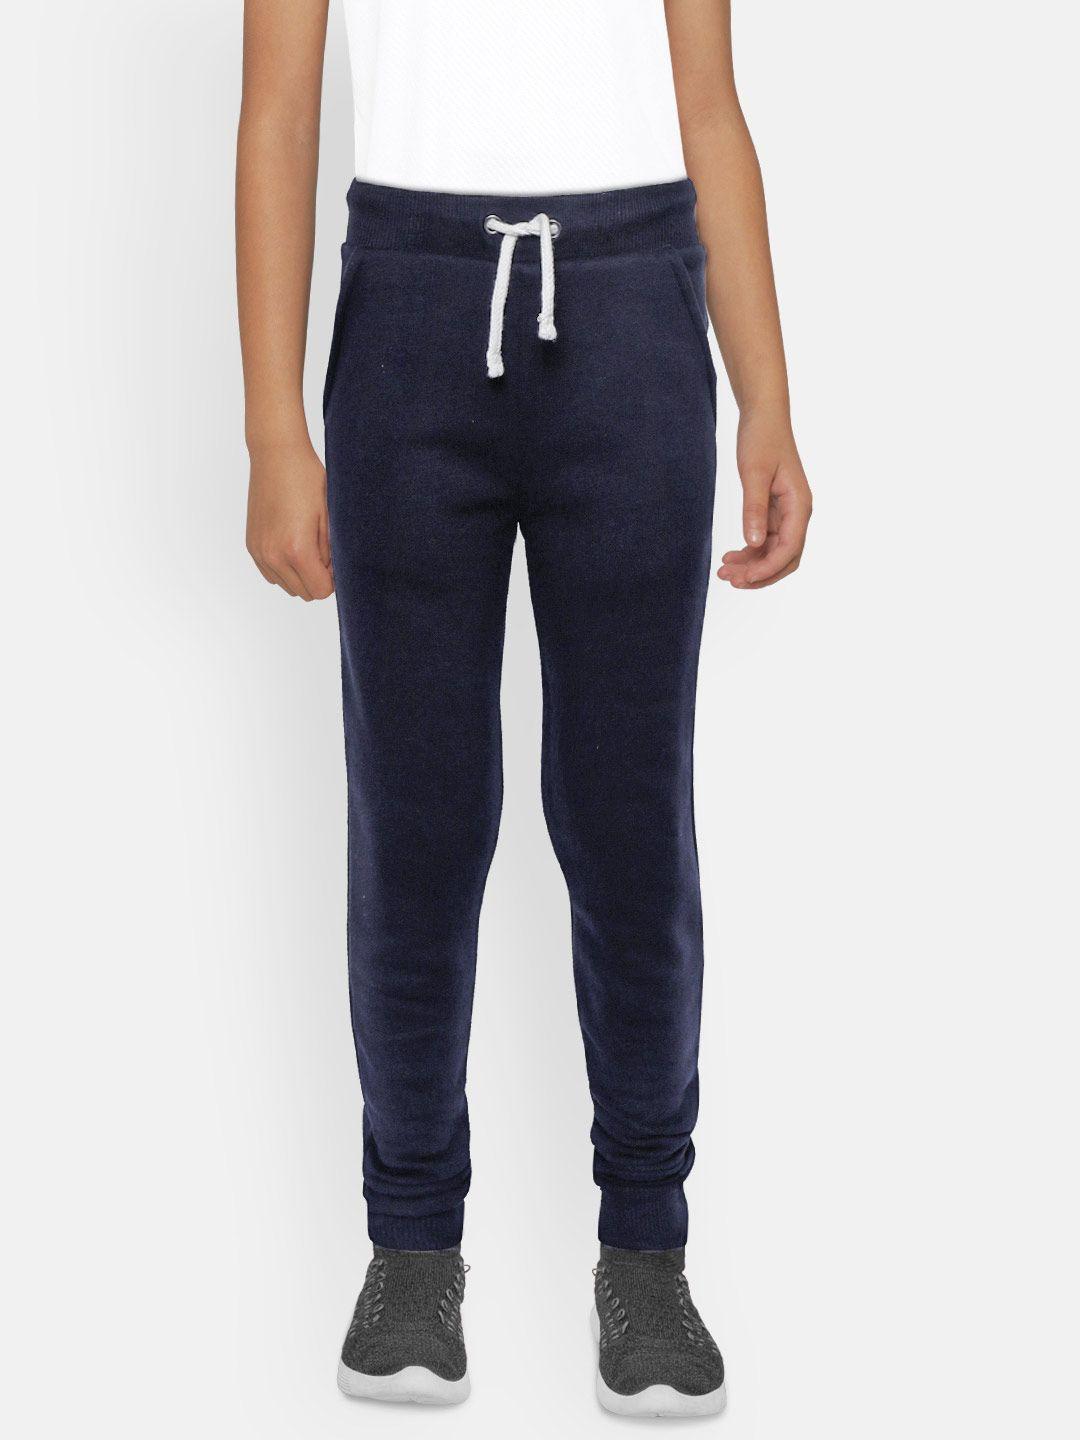 marks & spencer boys navy blue solid joggers